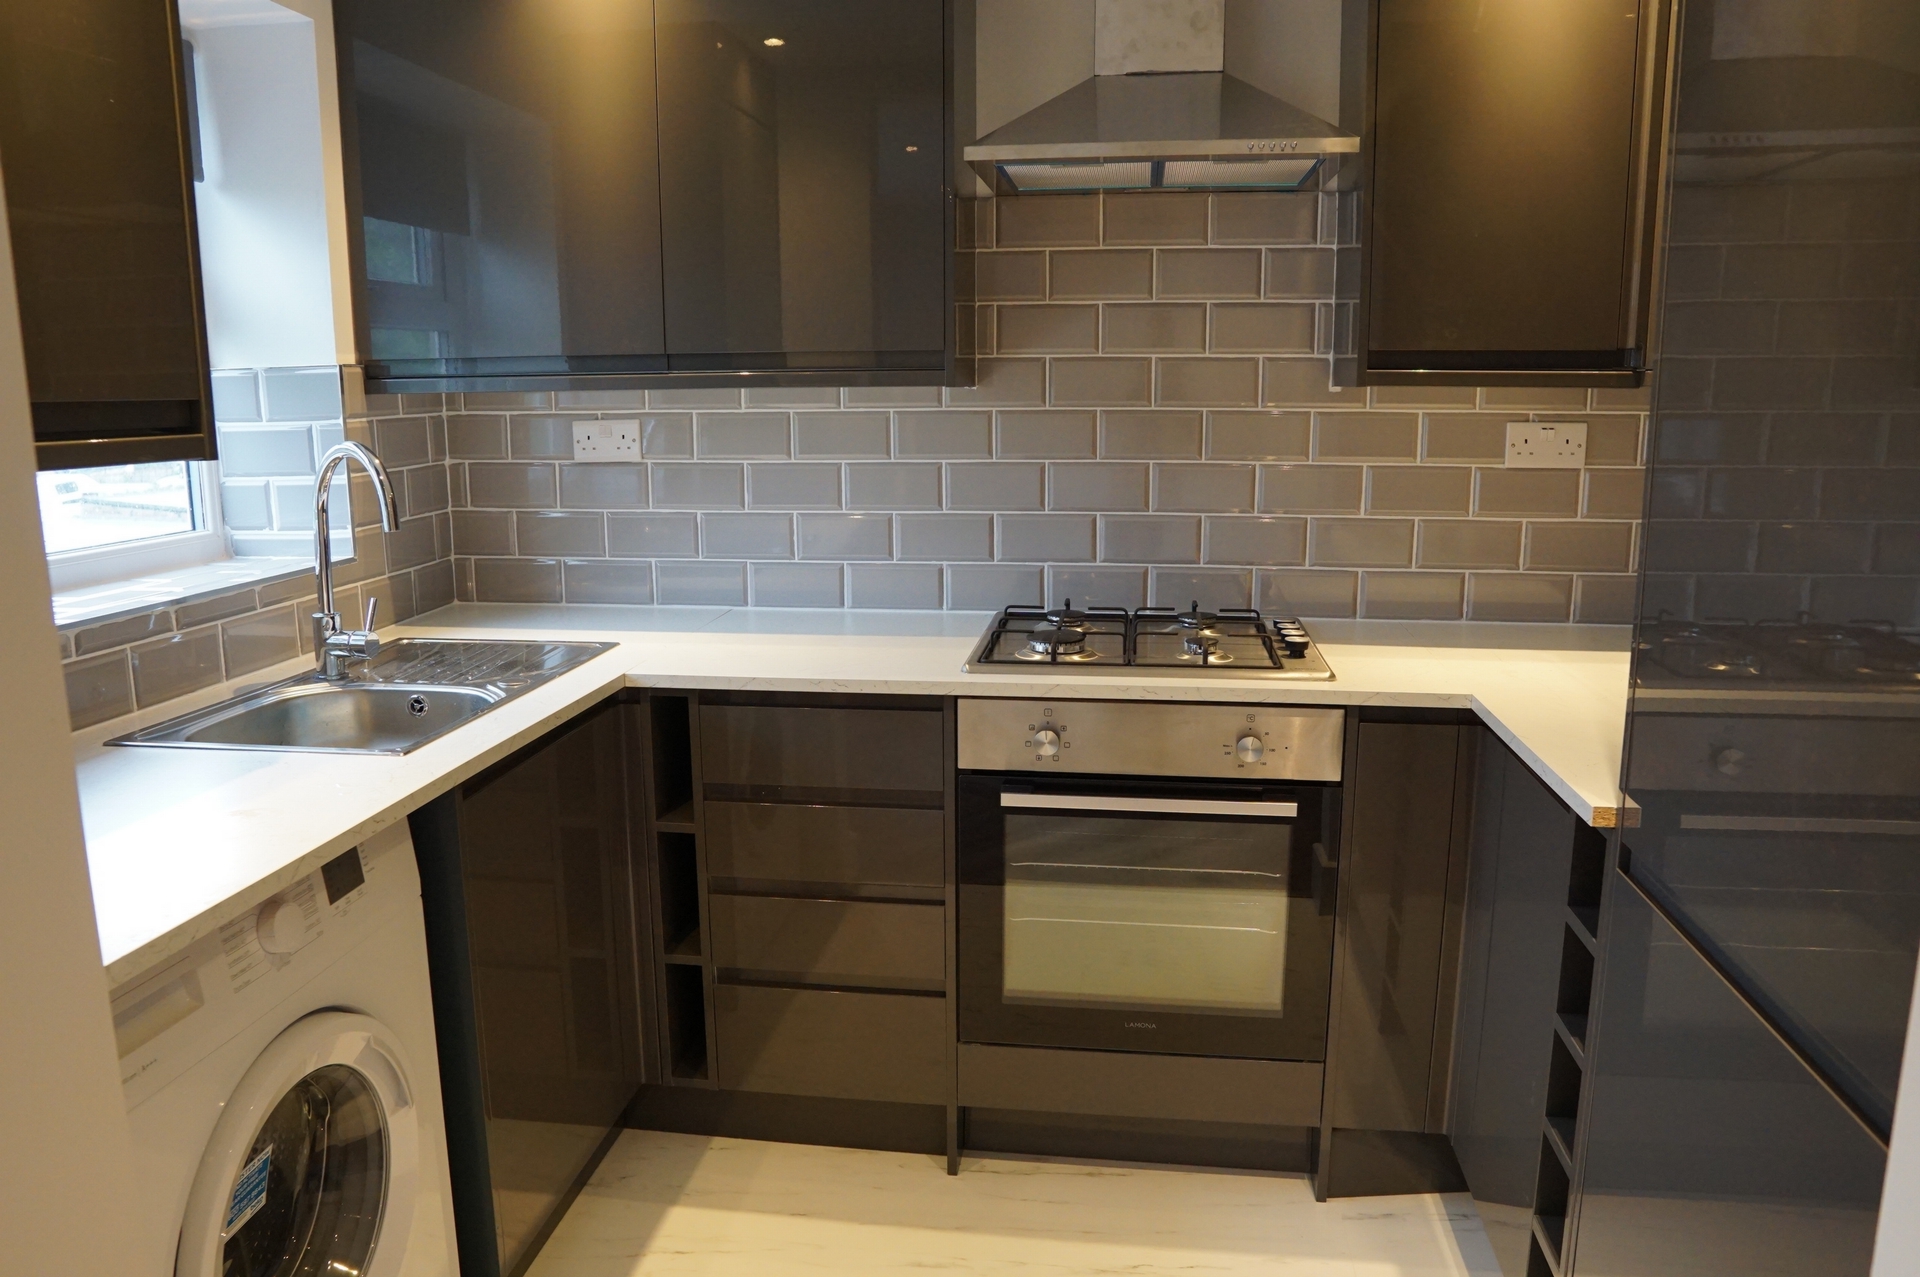 4 Bedroom Conversion to rent in Tooting, London, SW17